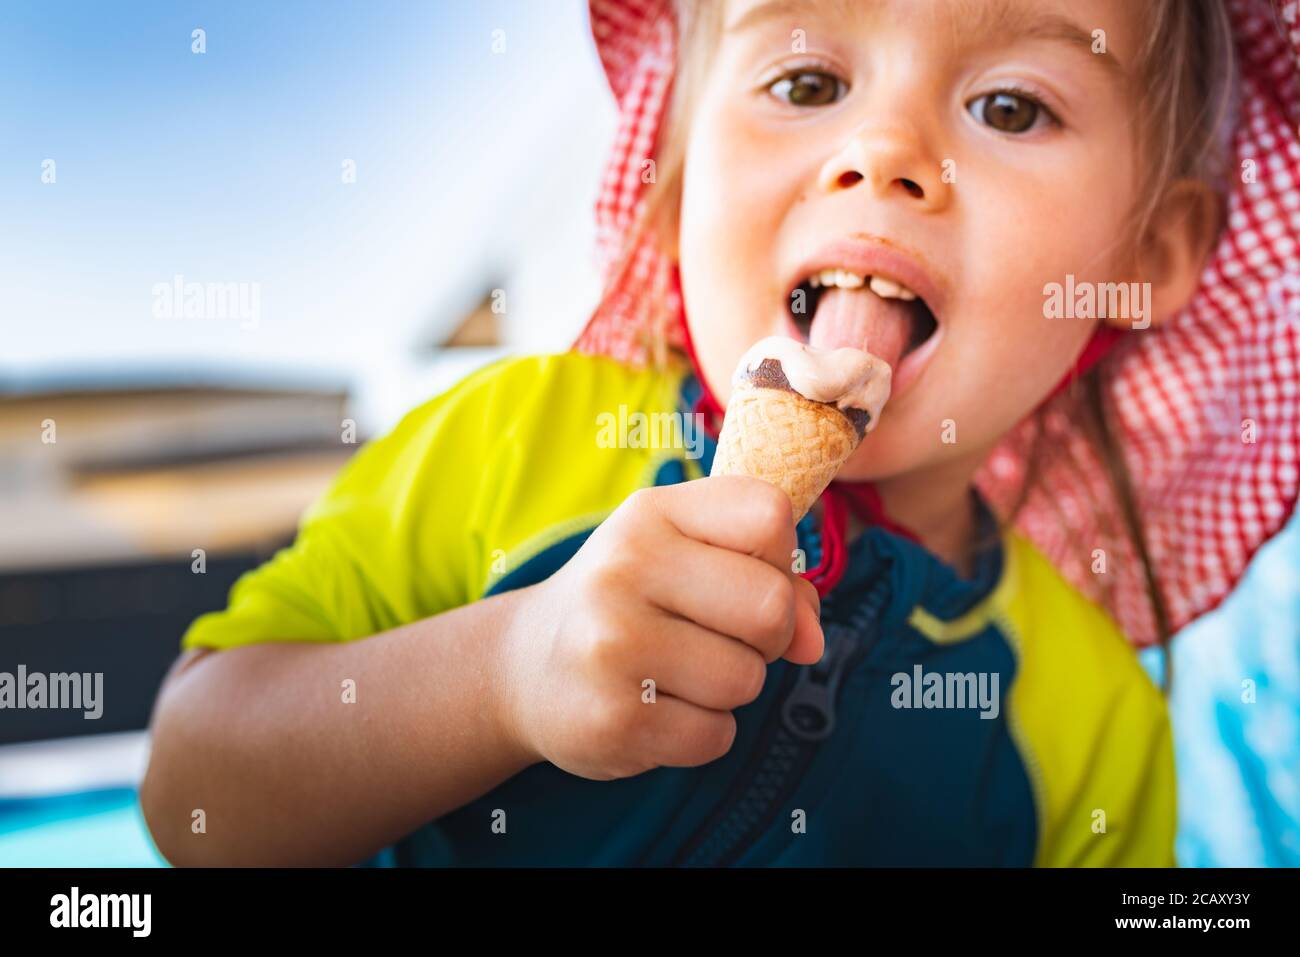 Portrait little child with big eyes licking icecream in summer. 2 year old baby girl. Stock Photo